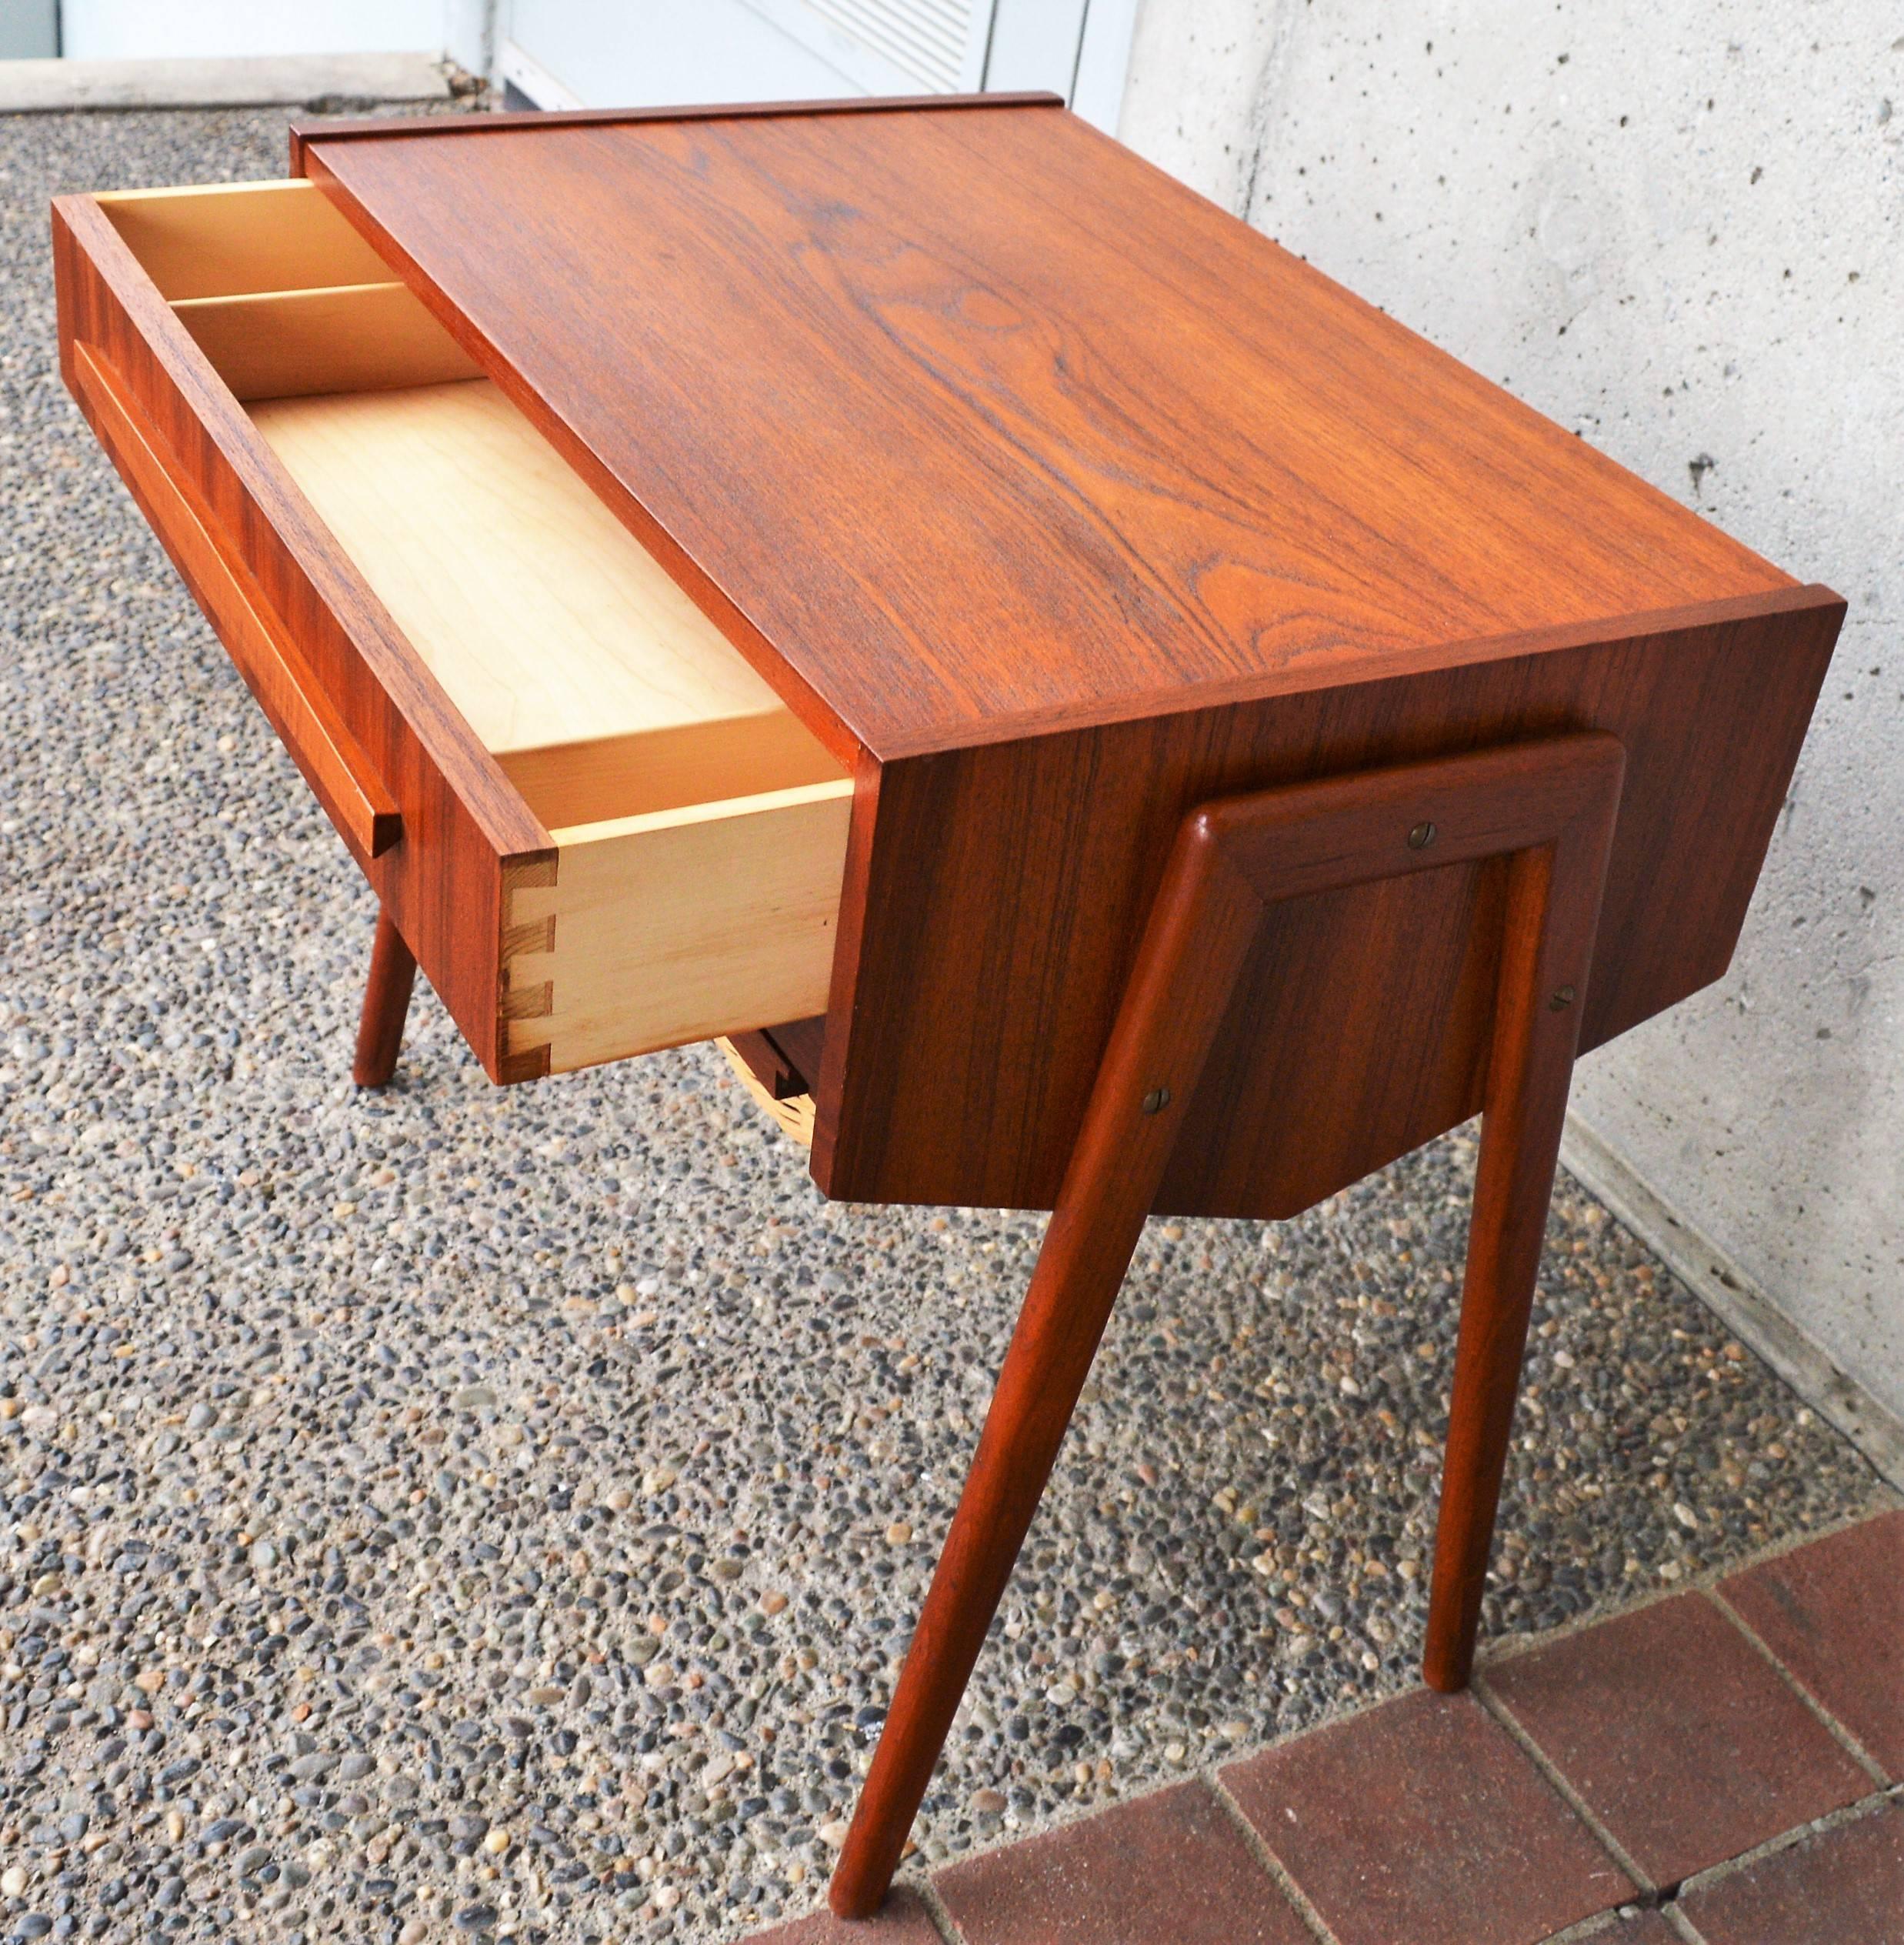 Mid-20th Century Danish Teak Atomic Style Side Table with Segmented Drawer and Basket